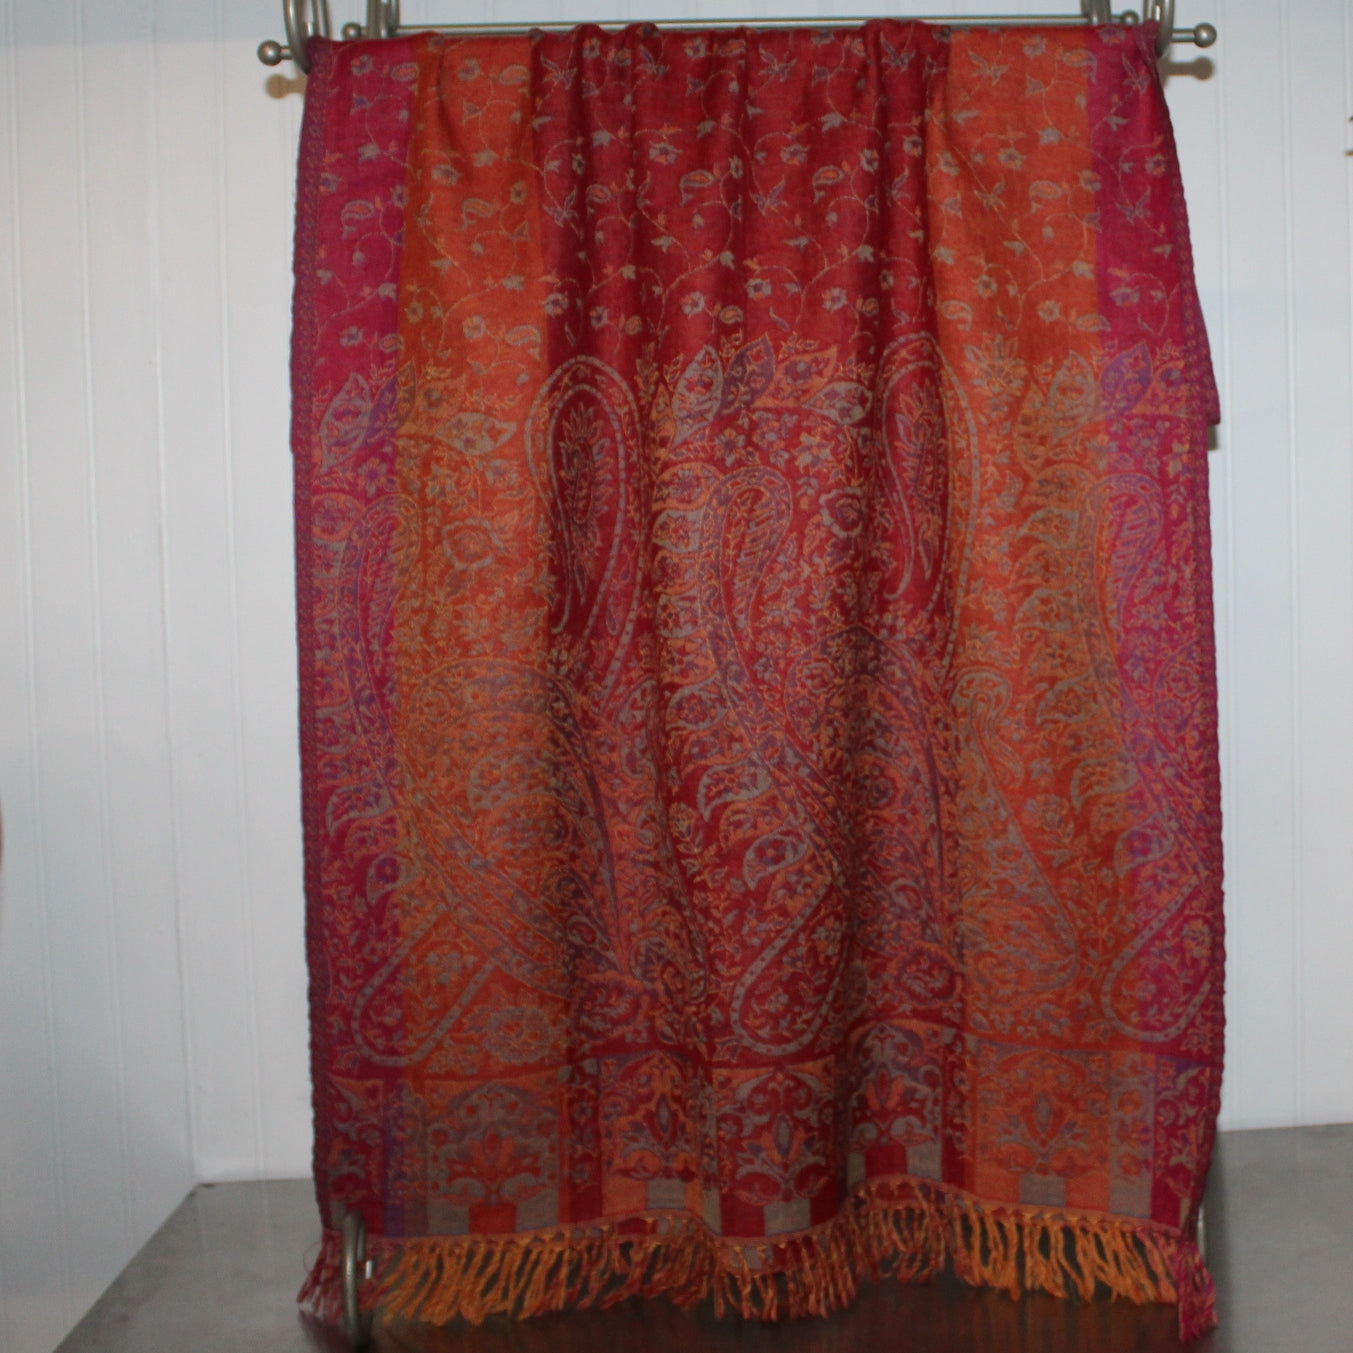 Pashmina Style Shawl Scarf Gorgeous Shades Red Coral Purple 40" X 27" Estate item used for decor